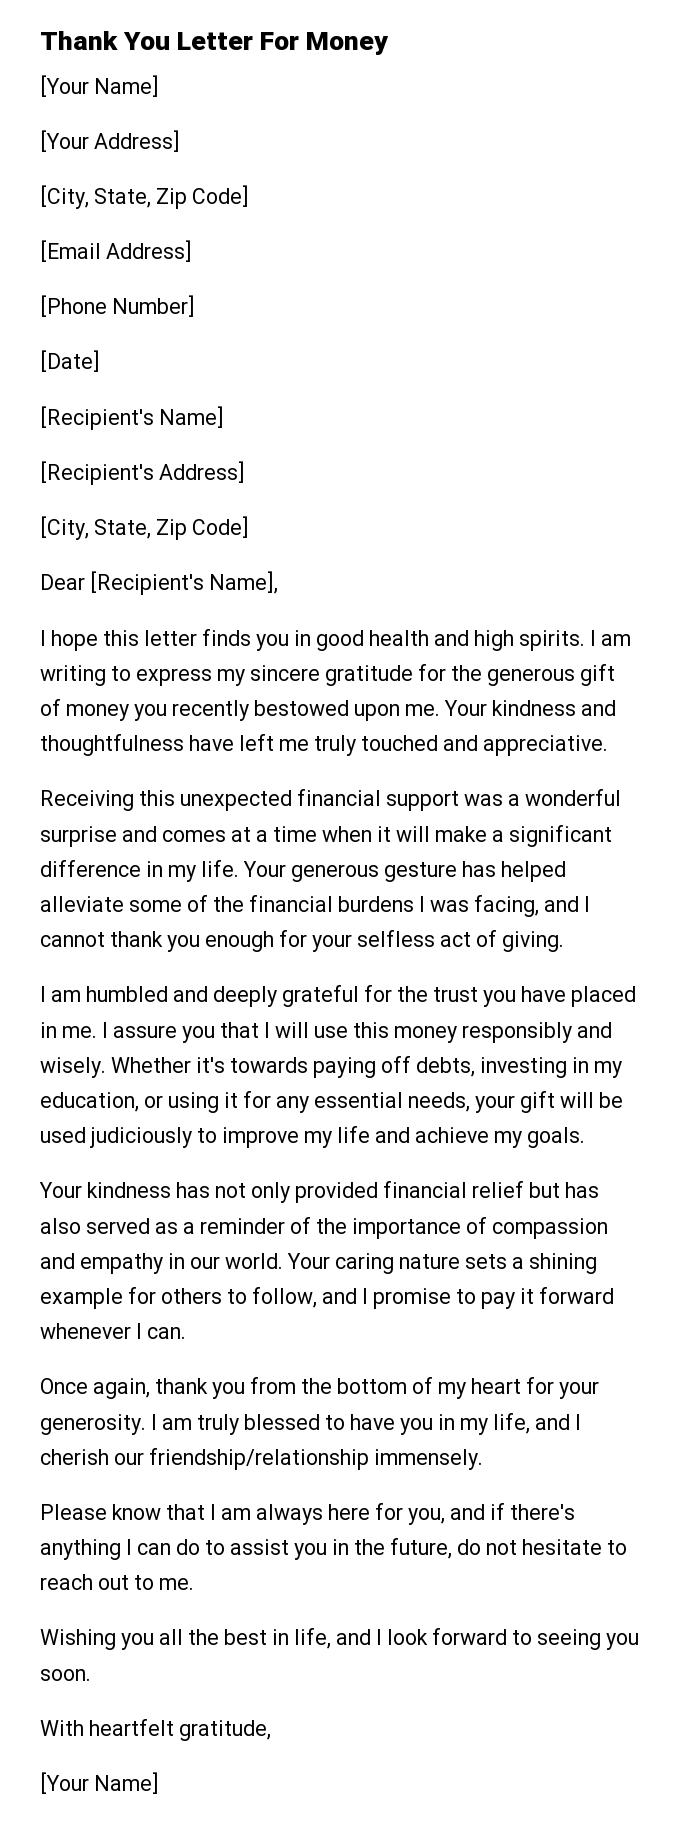 Thank You Letter For Money